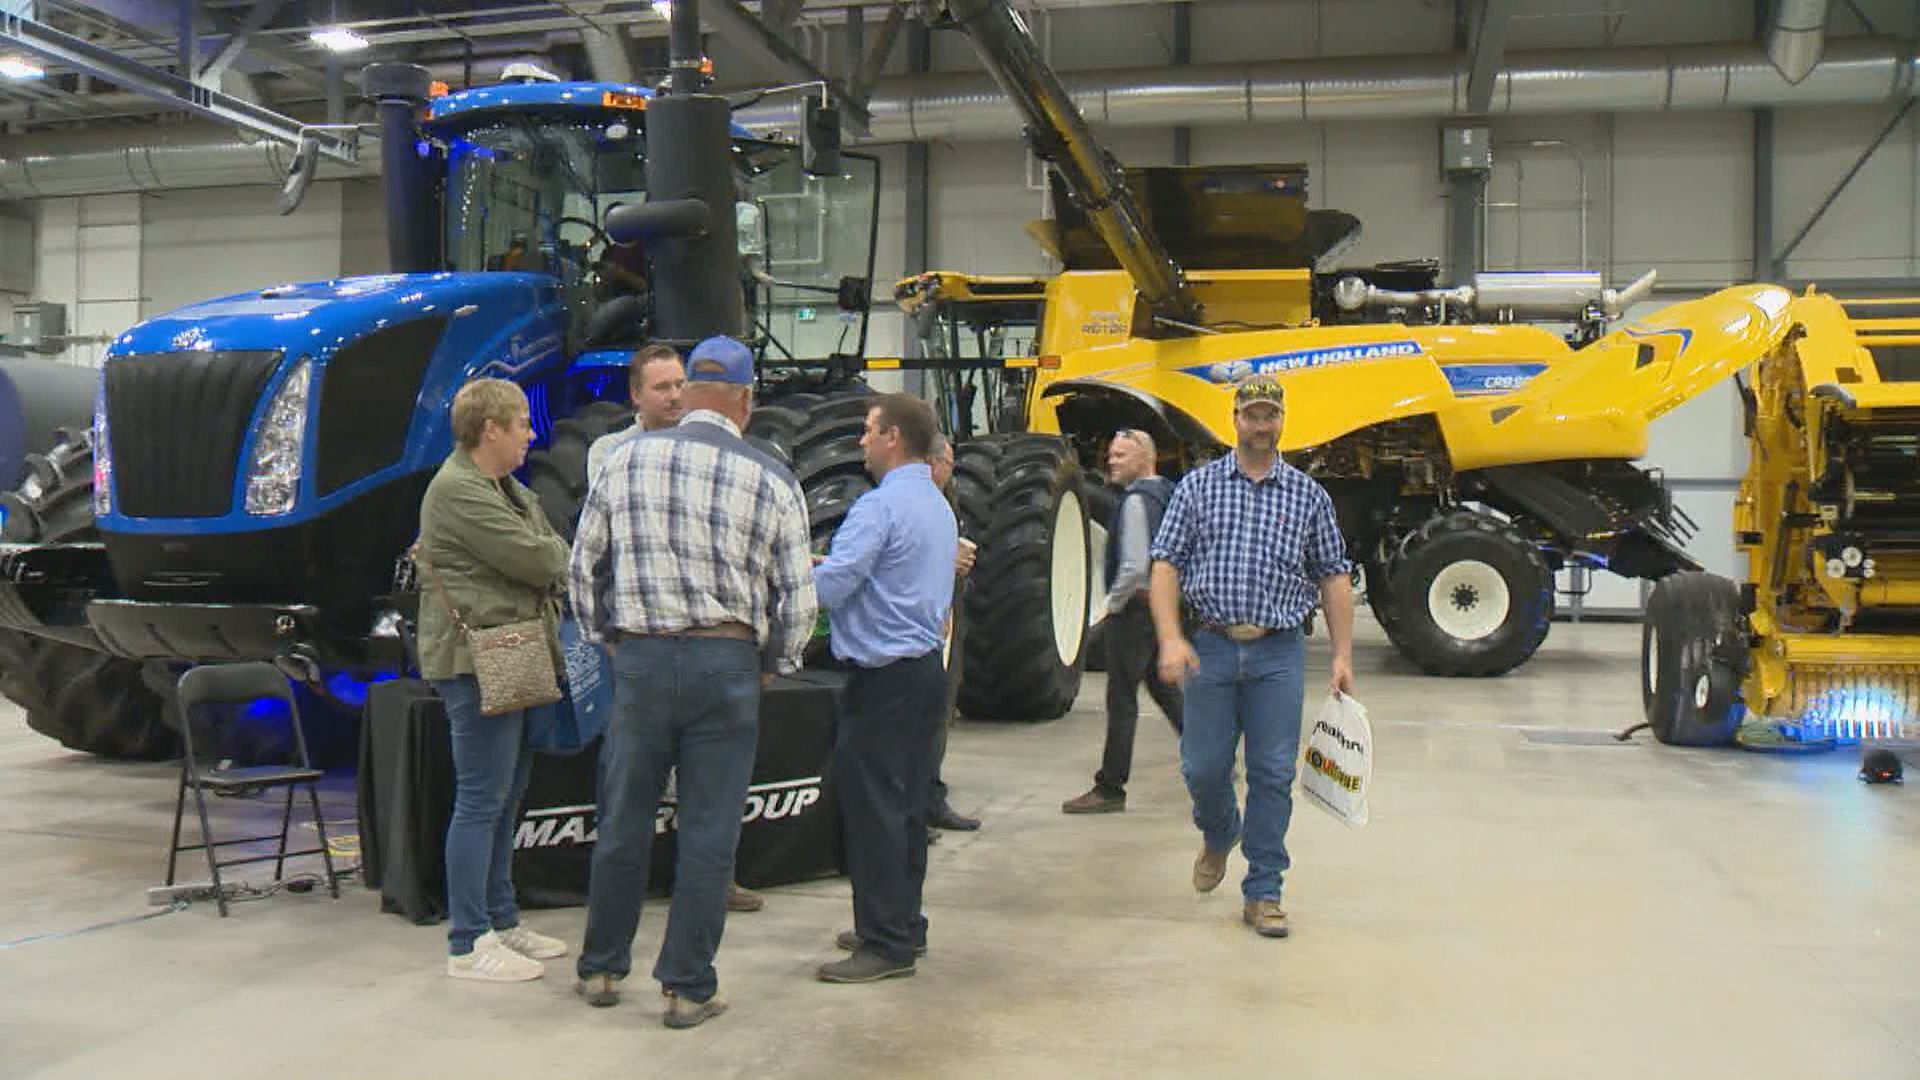 Agtech is the focus for this year’s Canada’s Farm Show in Regina